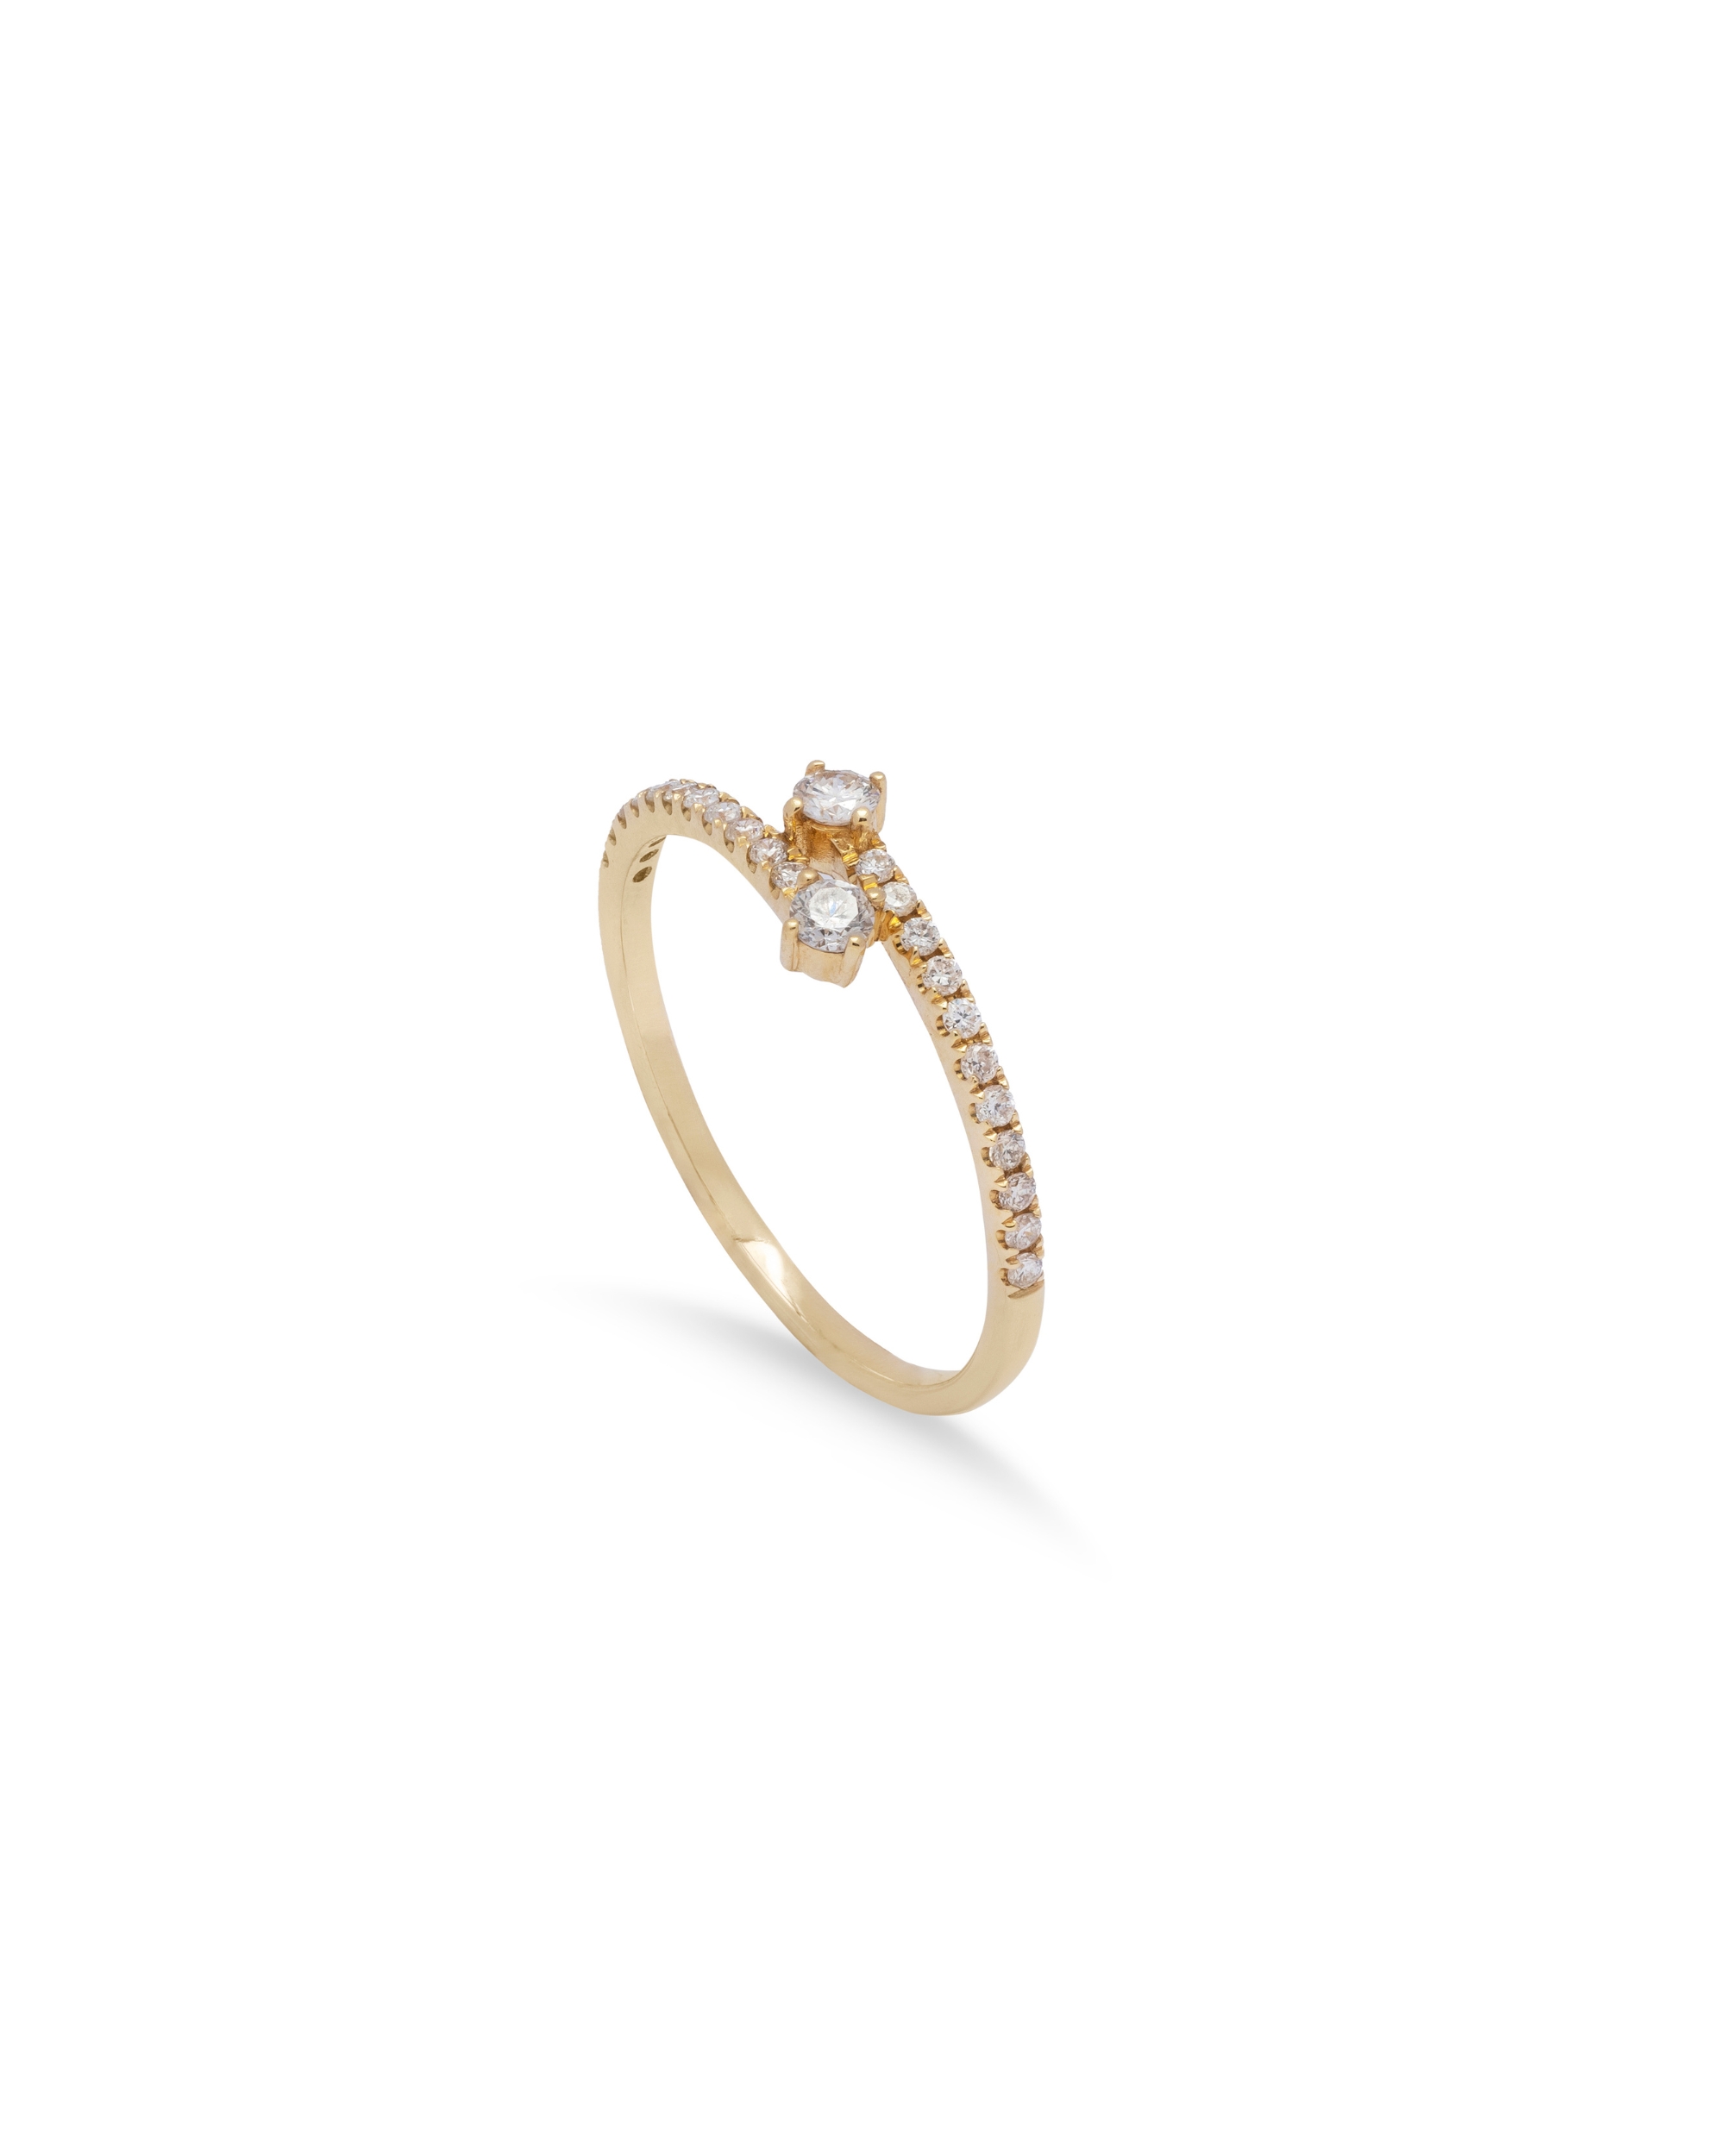 TBZ - The Original 18KT Yellow Gold and Diamond Ring for Girls : Amazon.in:  Fashion